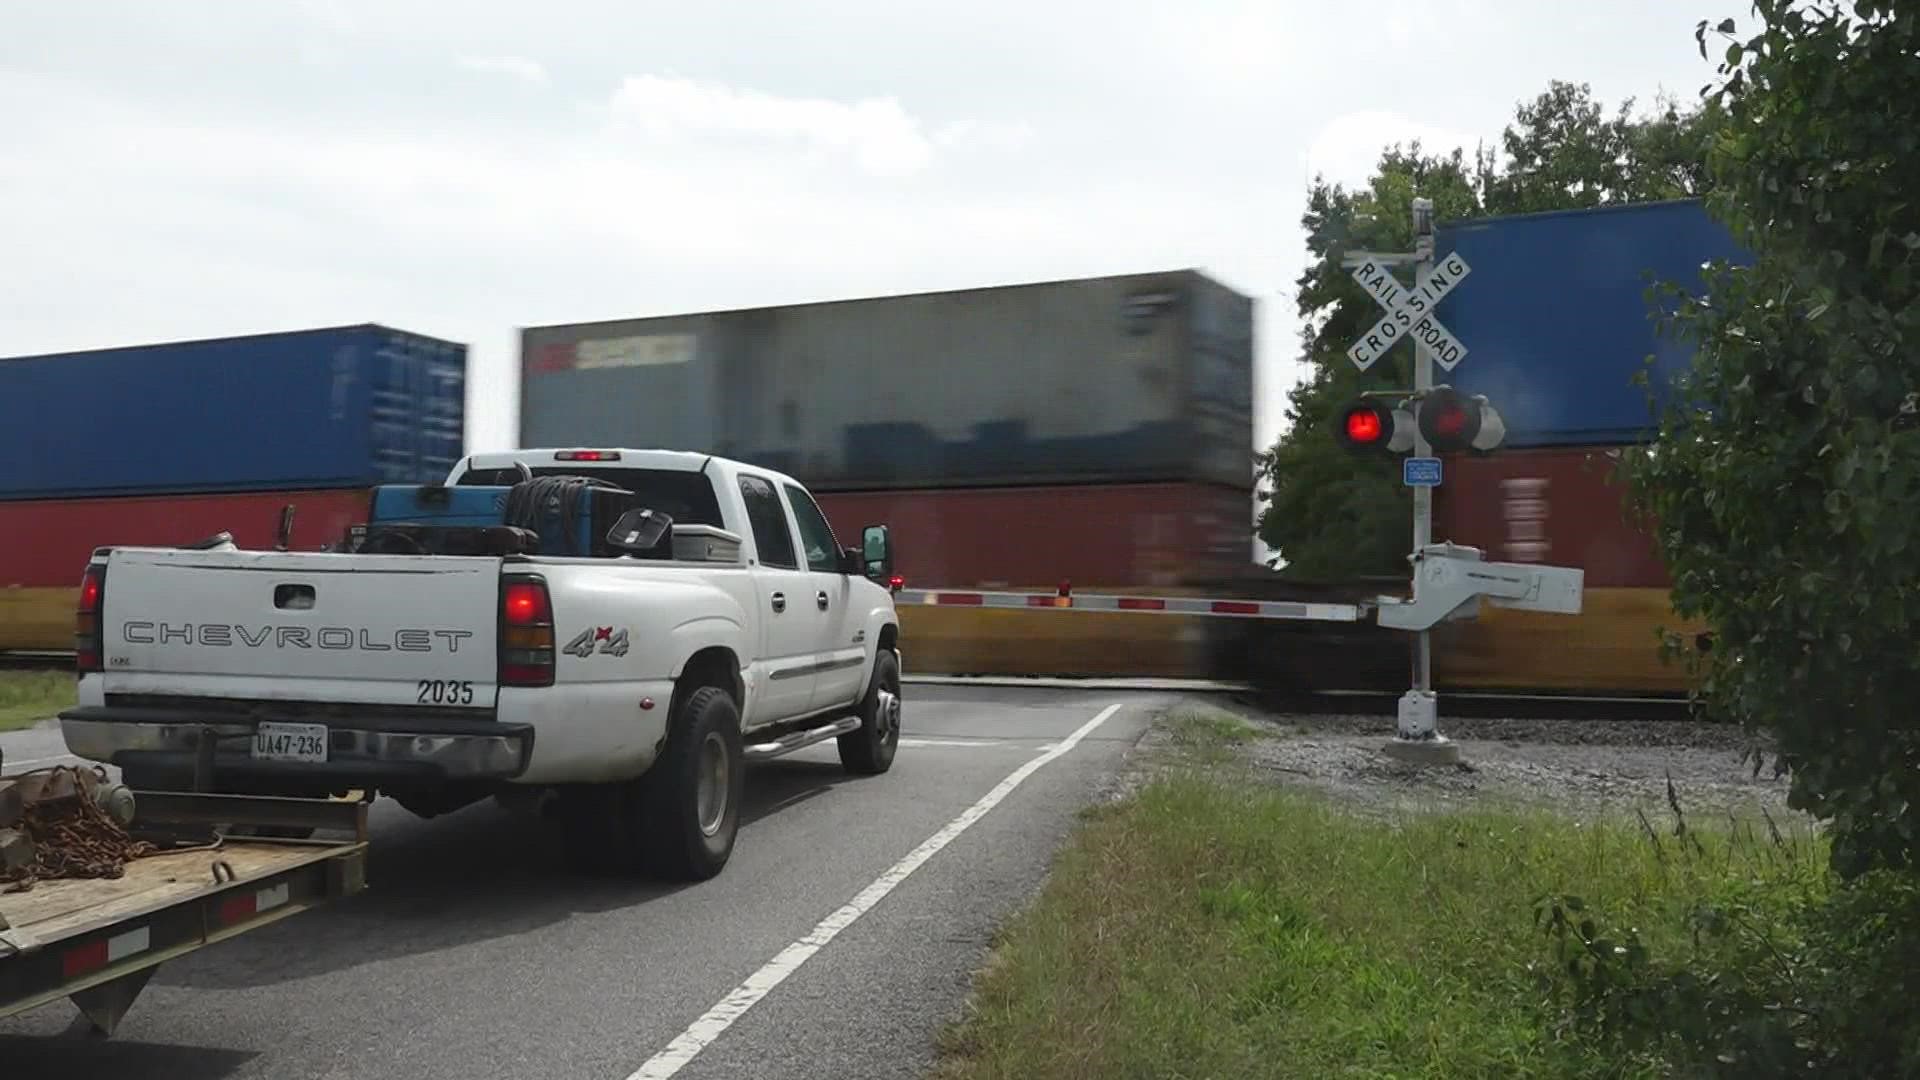 The collaboration is called Operation Clear Track. They want to make sure people know the law about railroad crossings, to keep them safe from oncoming trains.